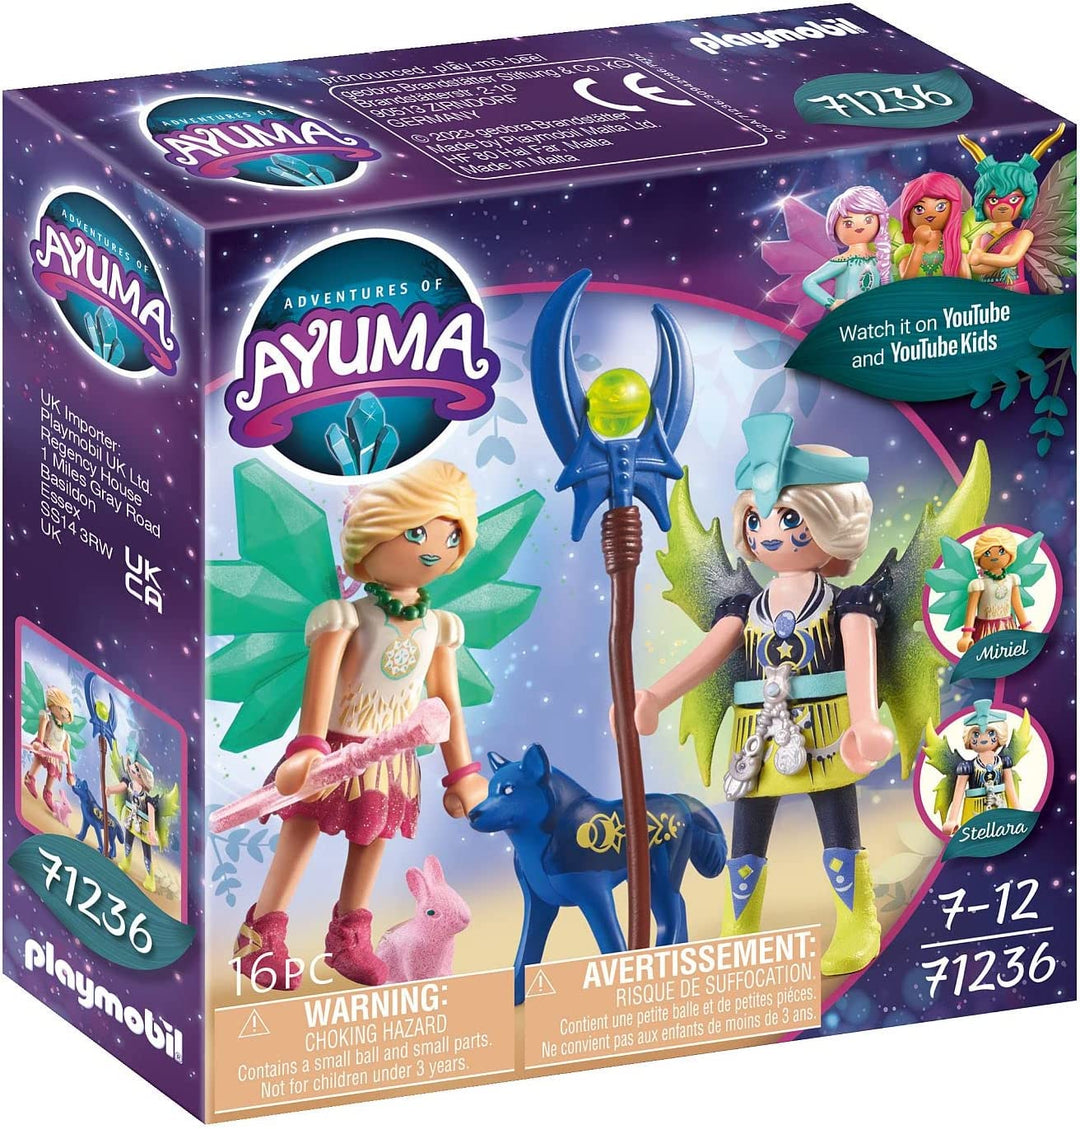 Playmobil 71236 Adventures of Ayuma Crystal and Moon Fairy with Soul Animals